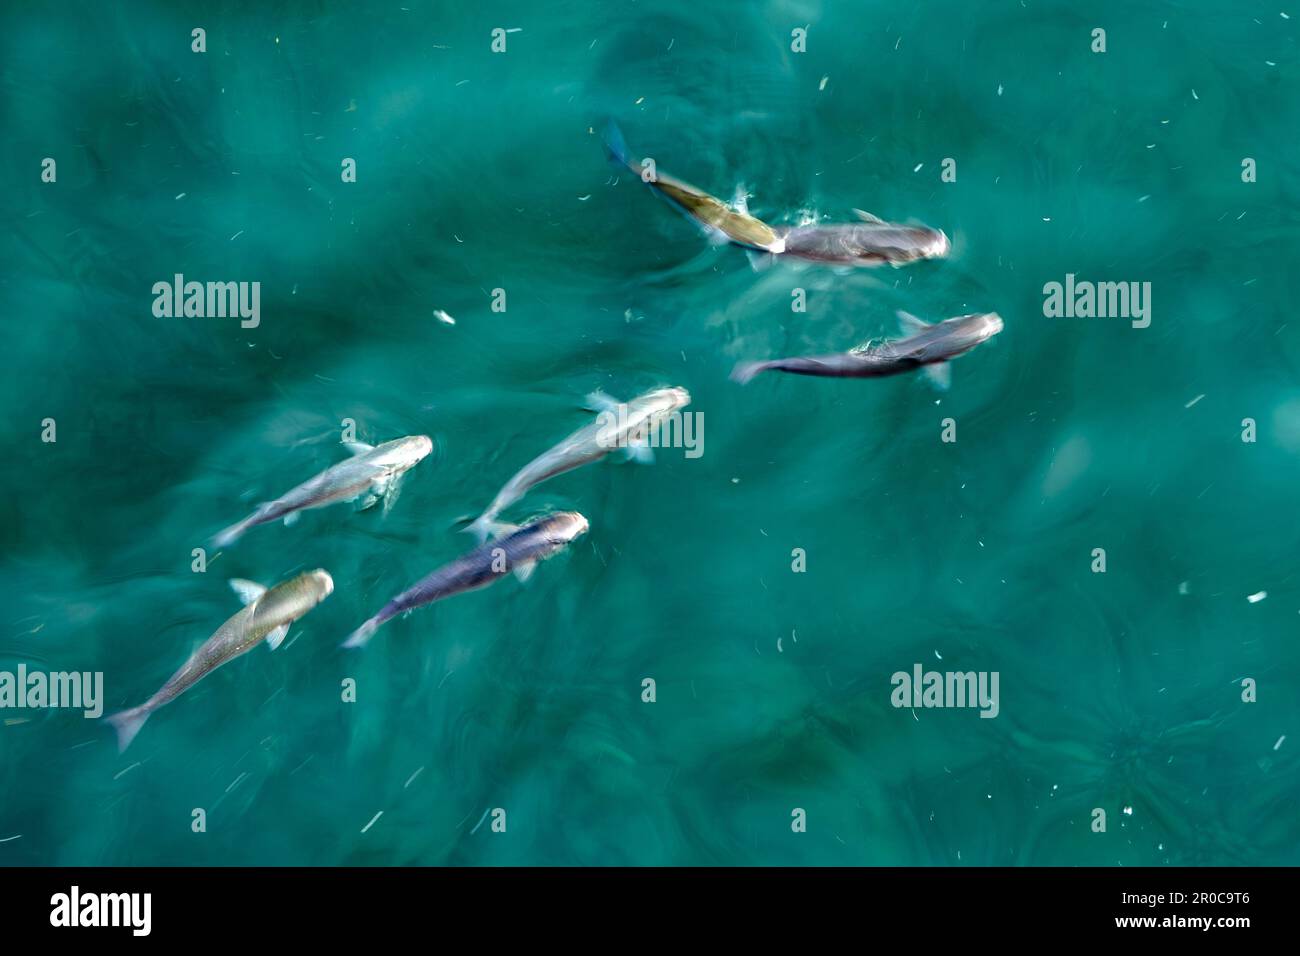 School of mullet fish long exposiure like a painting move effect Stock Photo